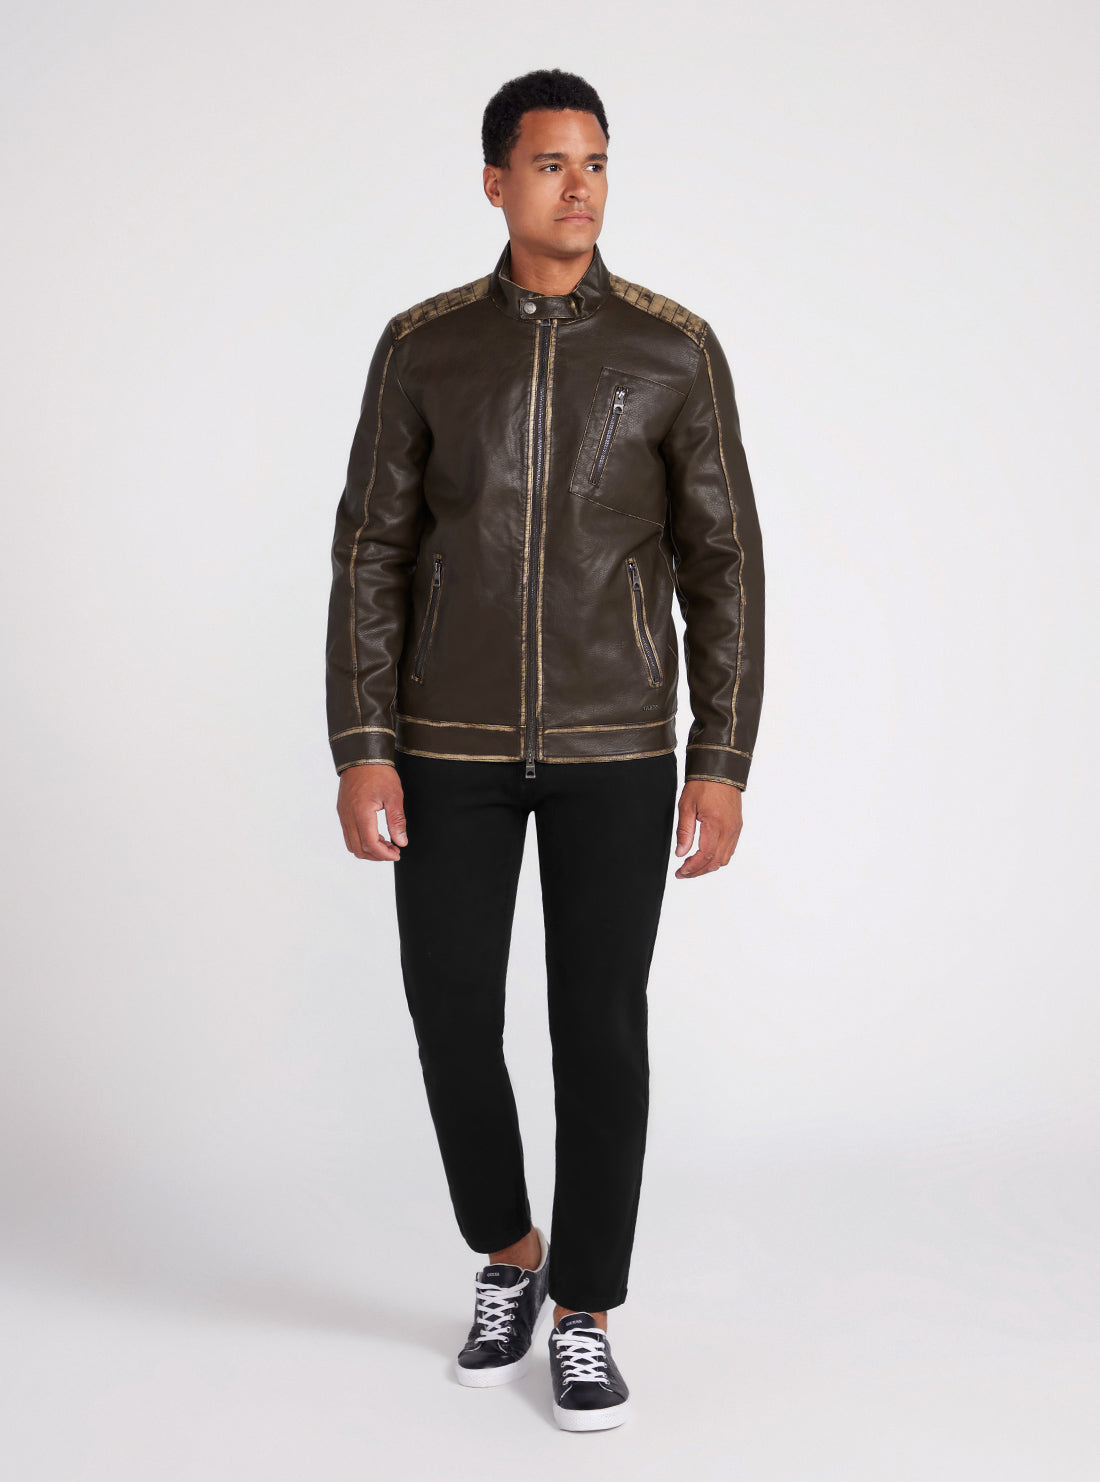 Dark Brown Washed Leather Jacket | GUESS Men's Apparel | full view